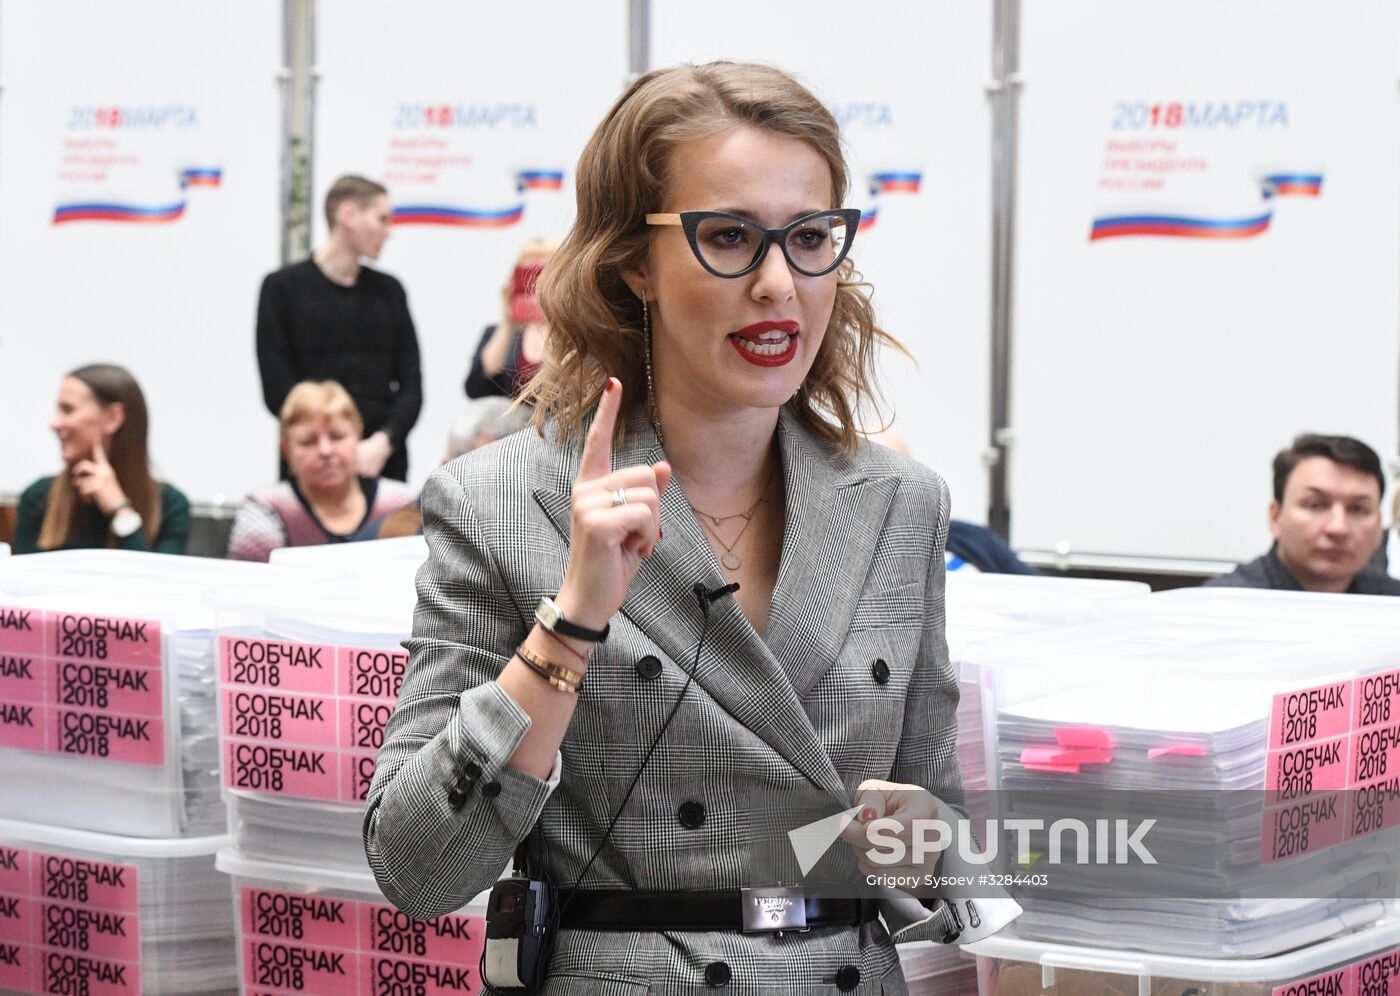 Submitting signatures in support of Ksenia Sobchak's registration as presidential candidate